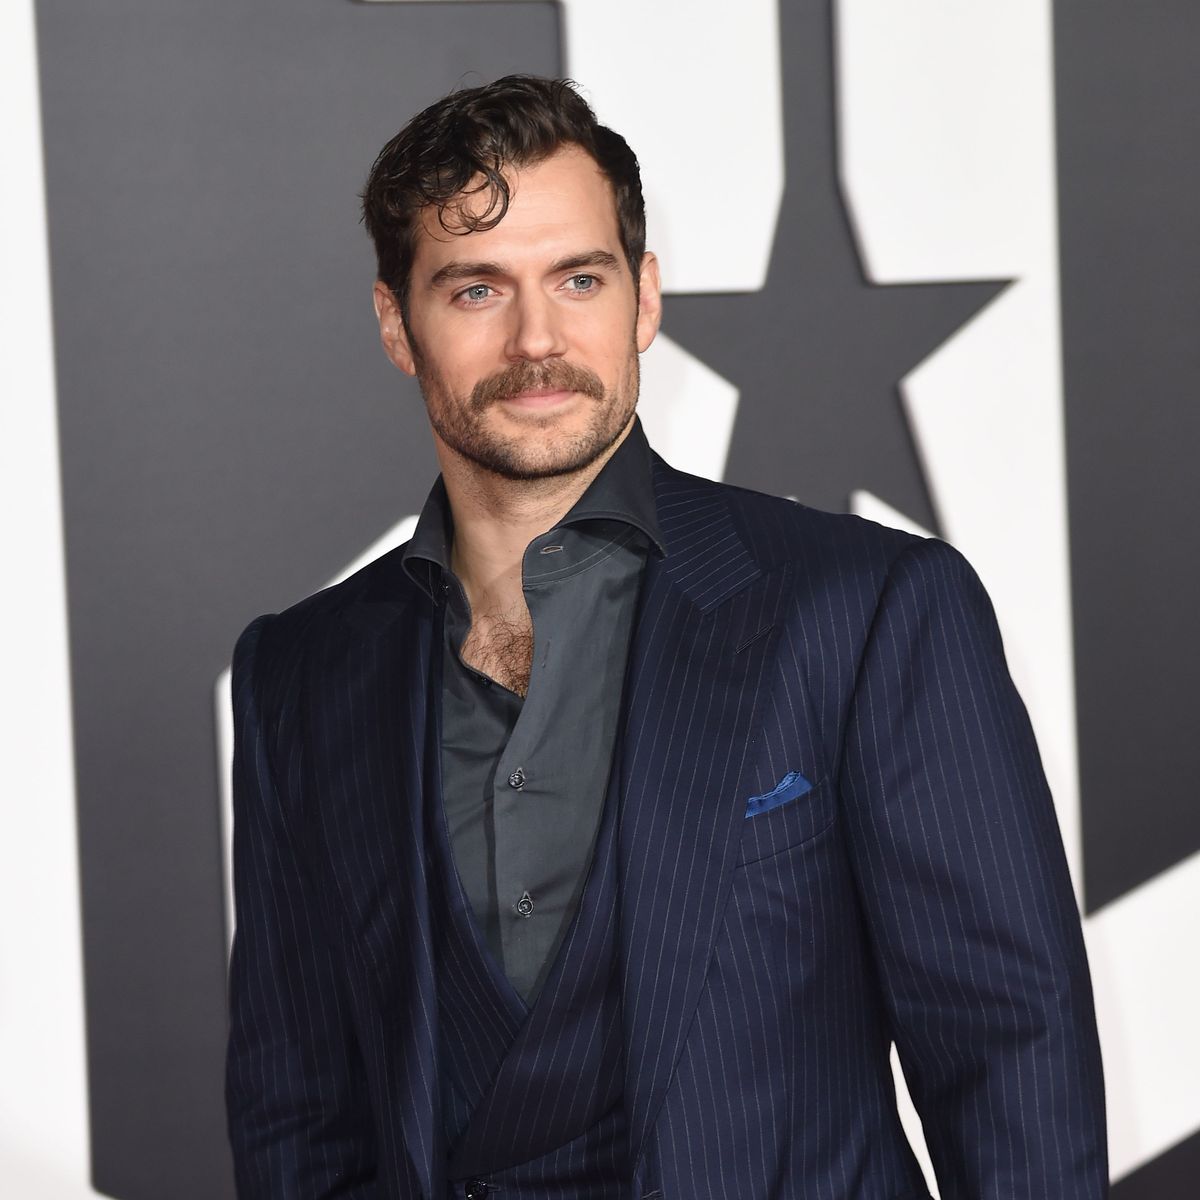 Contact Henry Cavill - Agent, Manager and Publicist Details